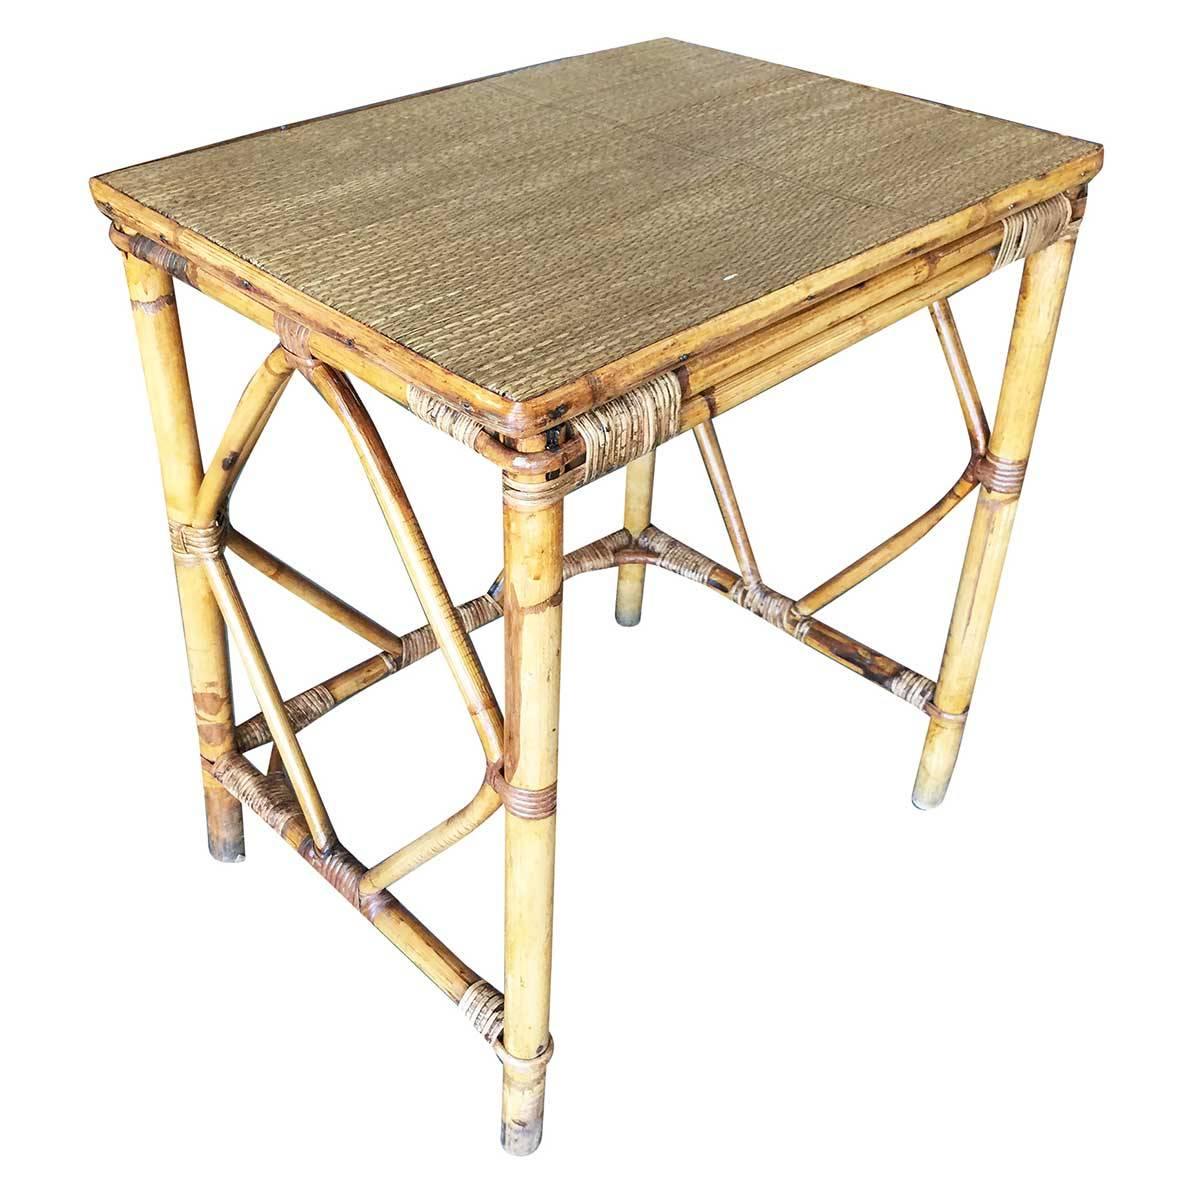 Simply yet elegant small rattan side table with steam pressed diamond shaped sides and rice mat top. The table features Classic wicker wrappings and Mid-Century appeal,

circa 1950.

Restored to new for you.

All rattan, bamboo and wicker furniture